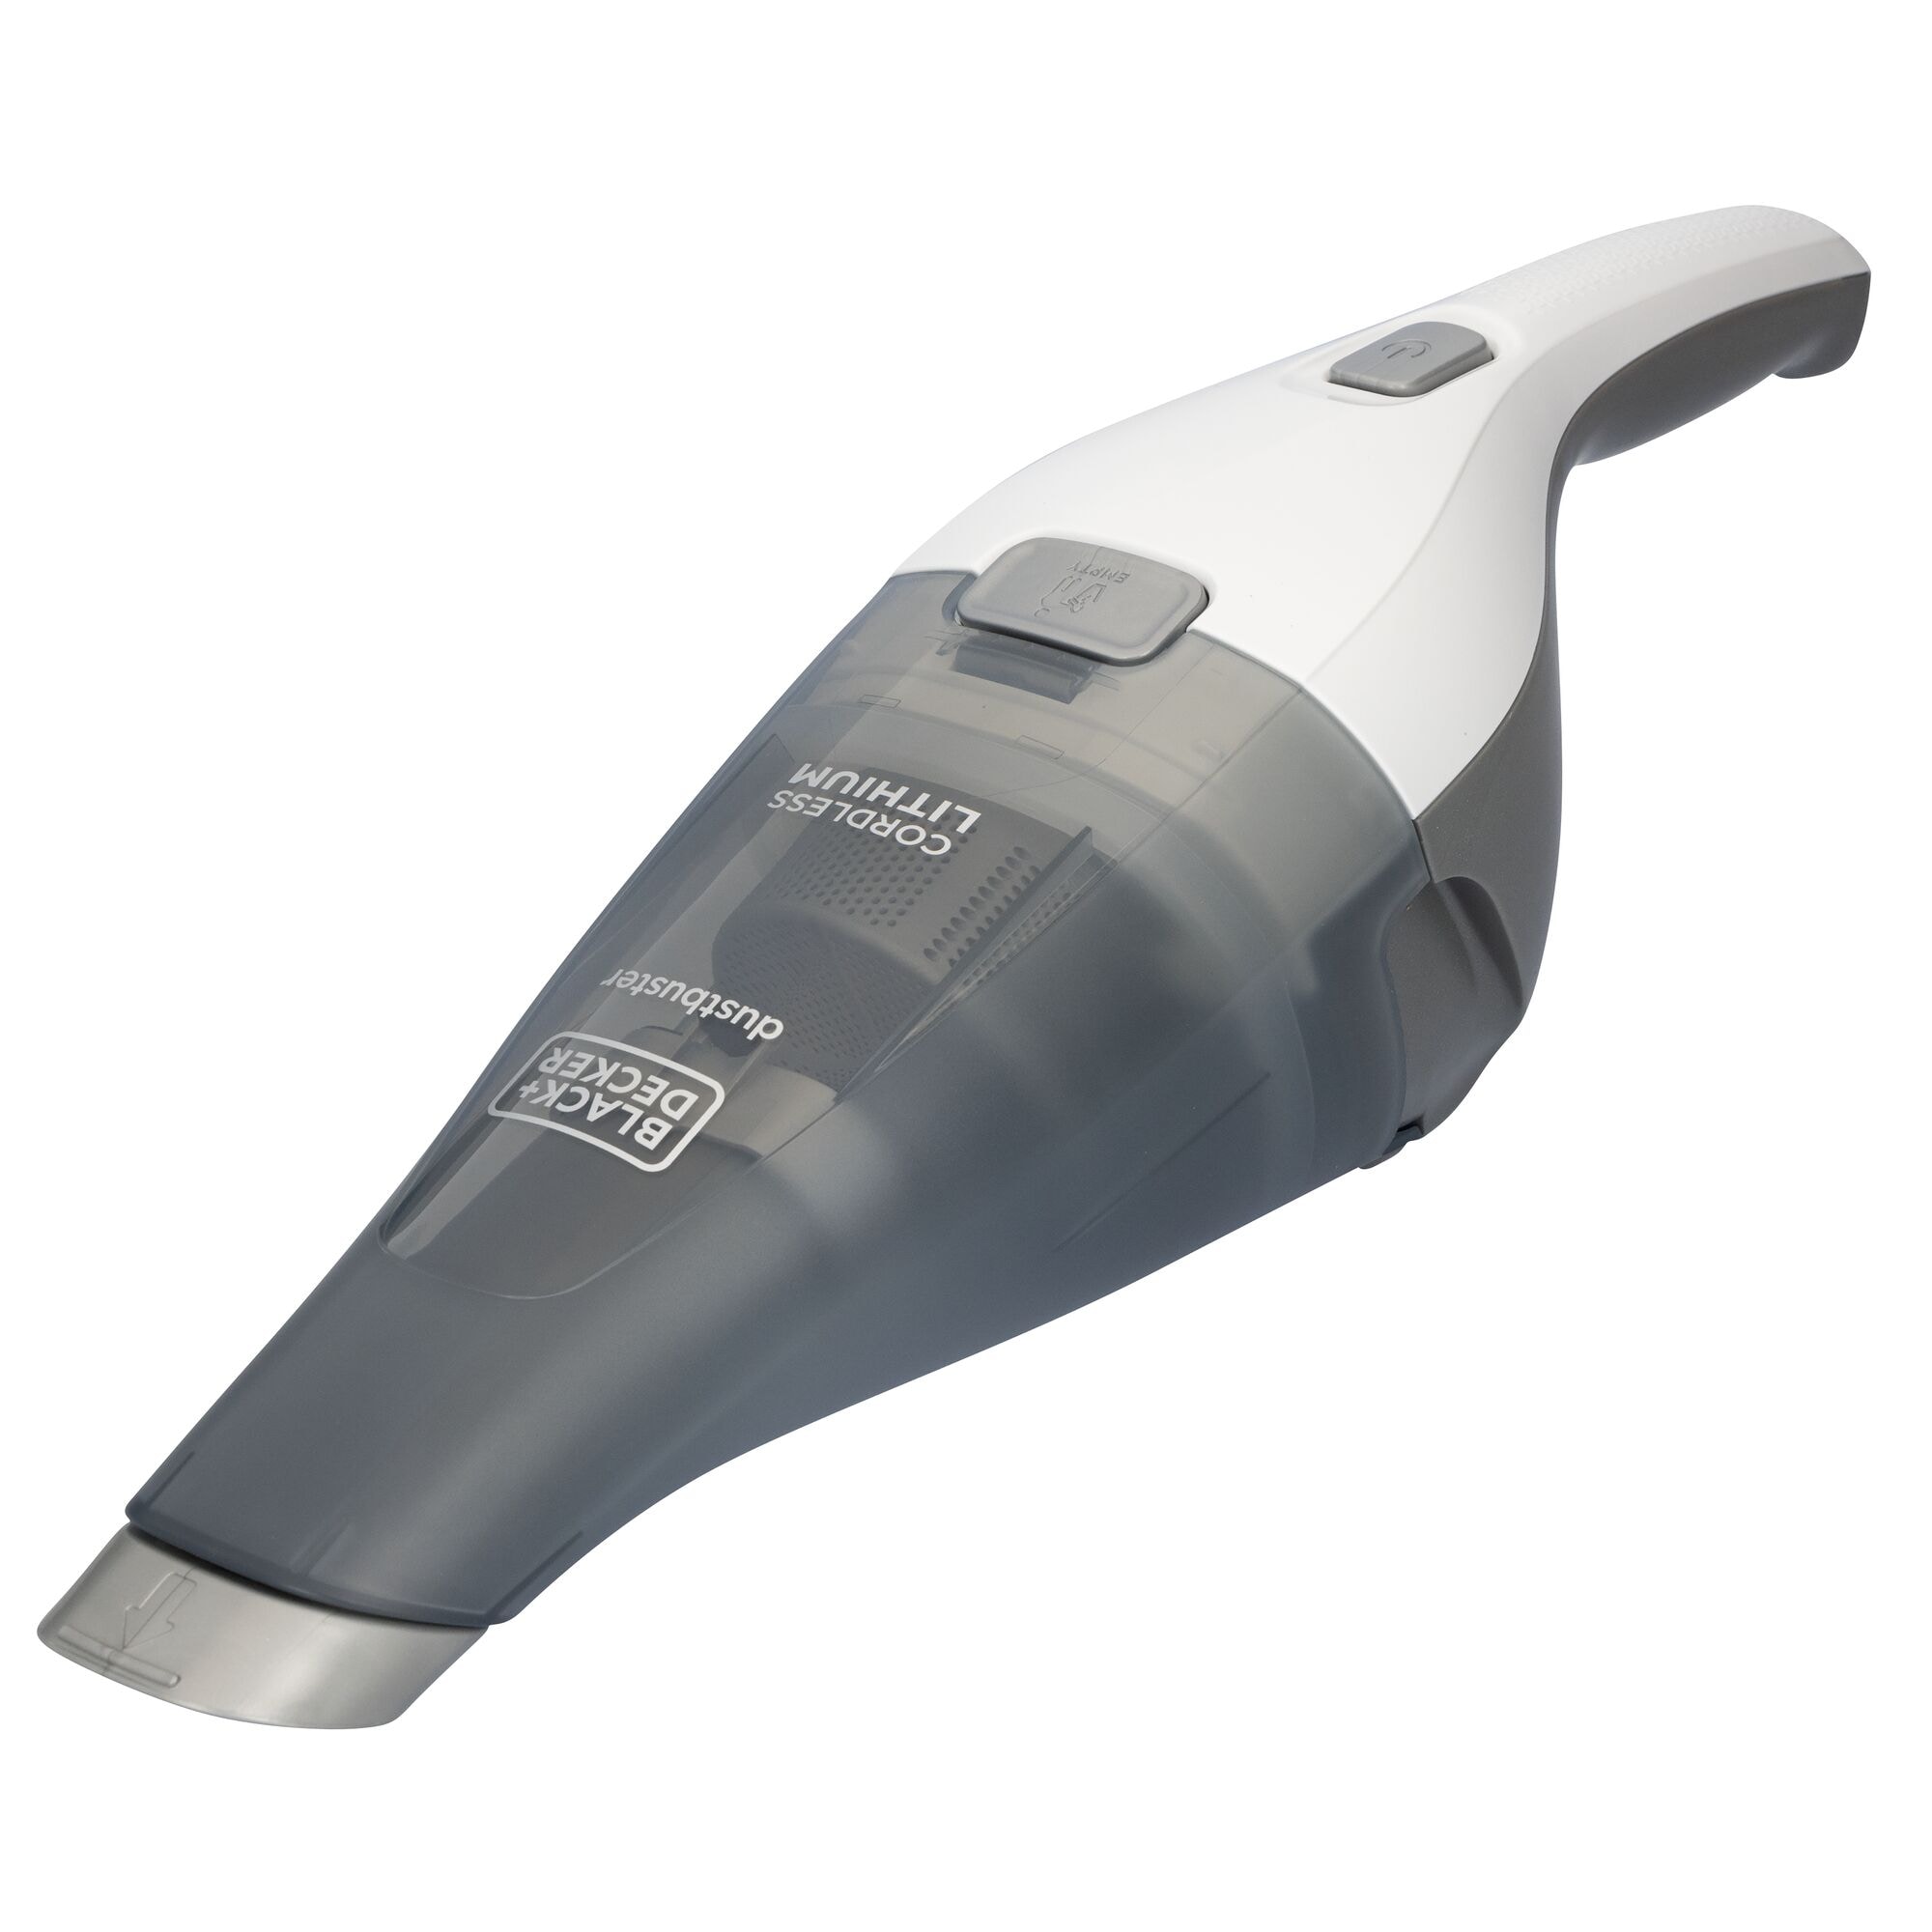 BLACK+DECKER B01GHAE0T8 18 V Lithium-Ion 2-in-1 Dustbuster Hand Vacuum with  Smart Tech, 36